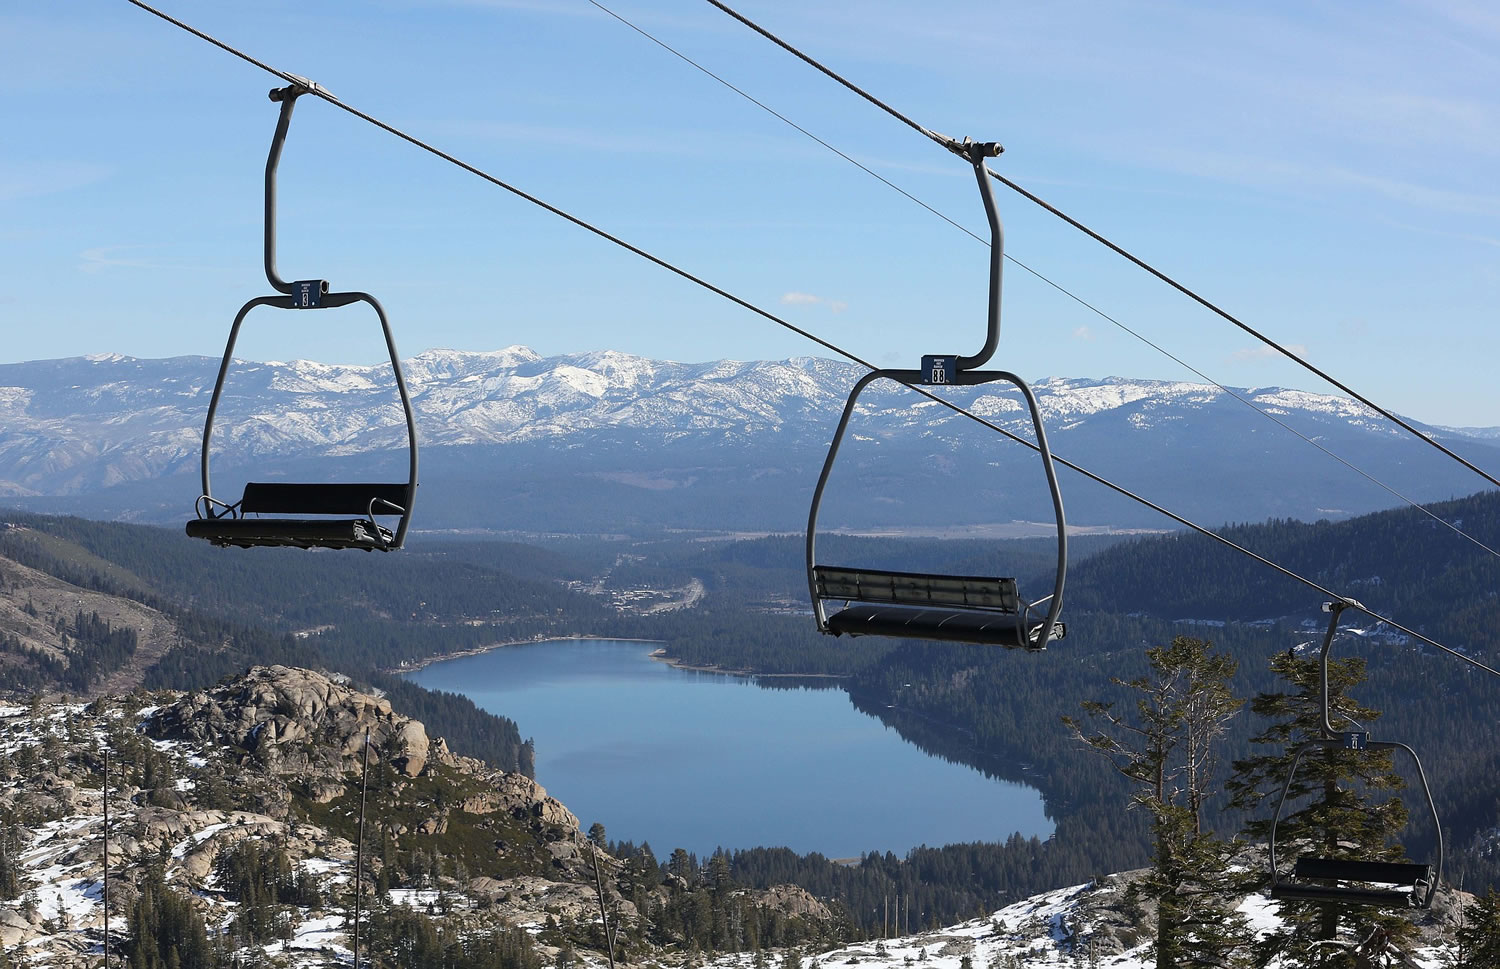 Associated Press files
A ski lift overlooking Donner Lake and slopes of visible rock sits idle Jan. 28 at Donner Ski Ranch in Norden, Calif.